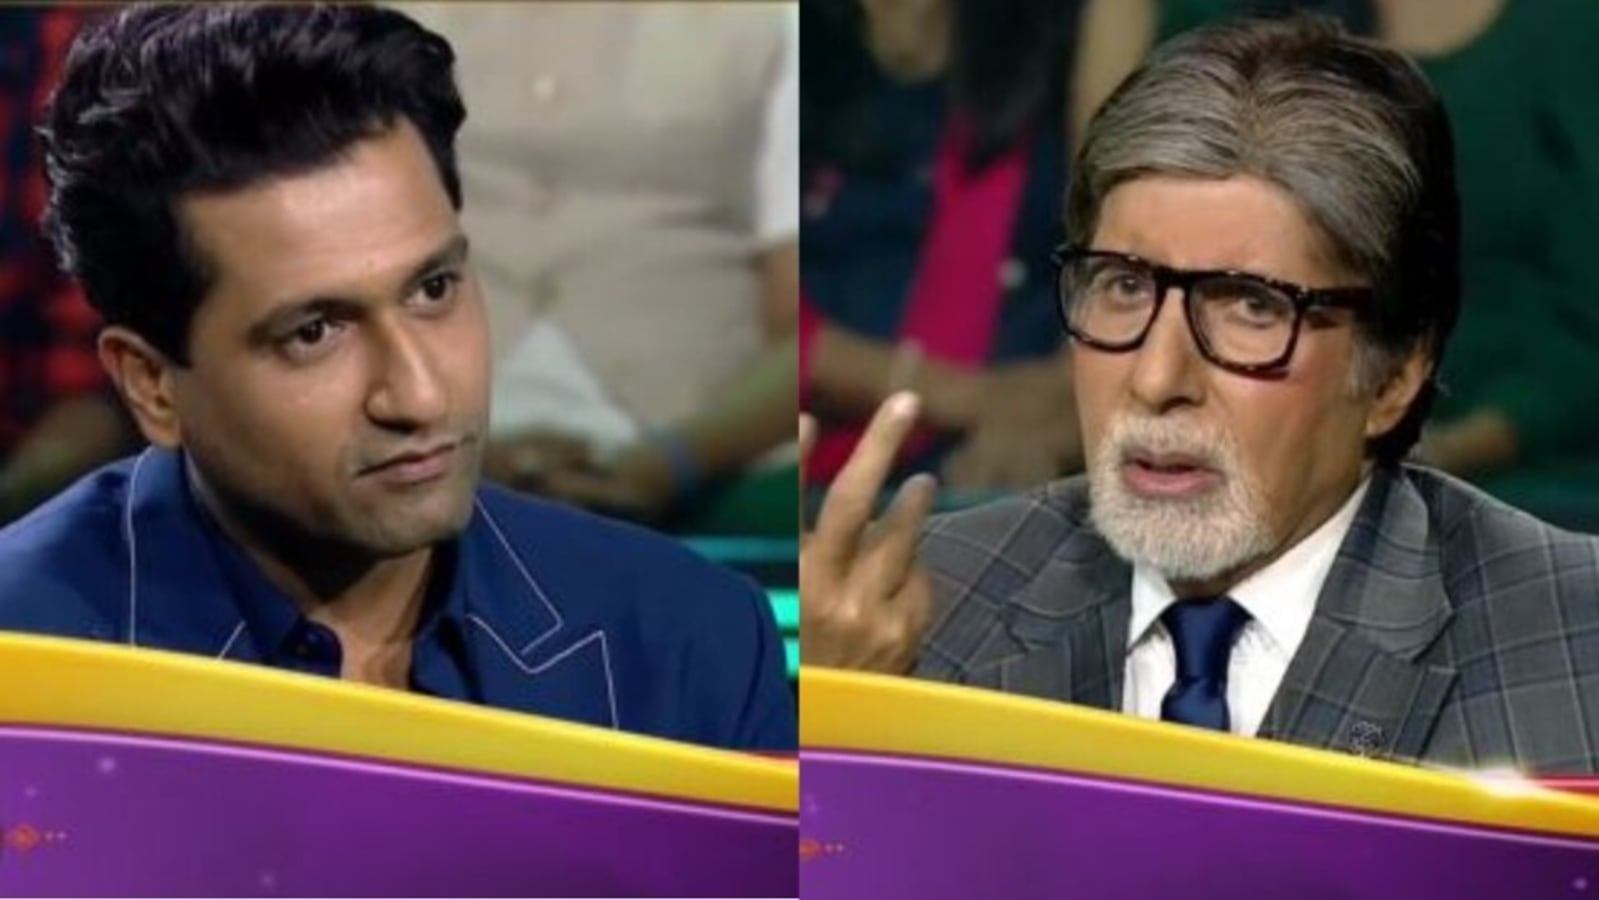 Amitabh Bachchan stunned as Vicky Kaushal says he can lose weight by eating burgers, pizzas: ‘Yeh toh ulti baat hogayi’